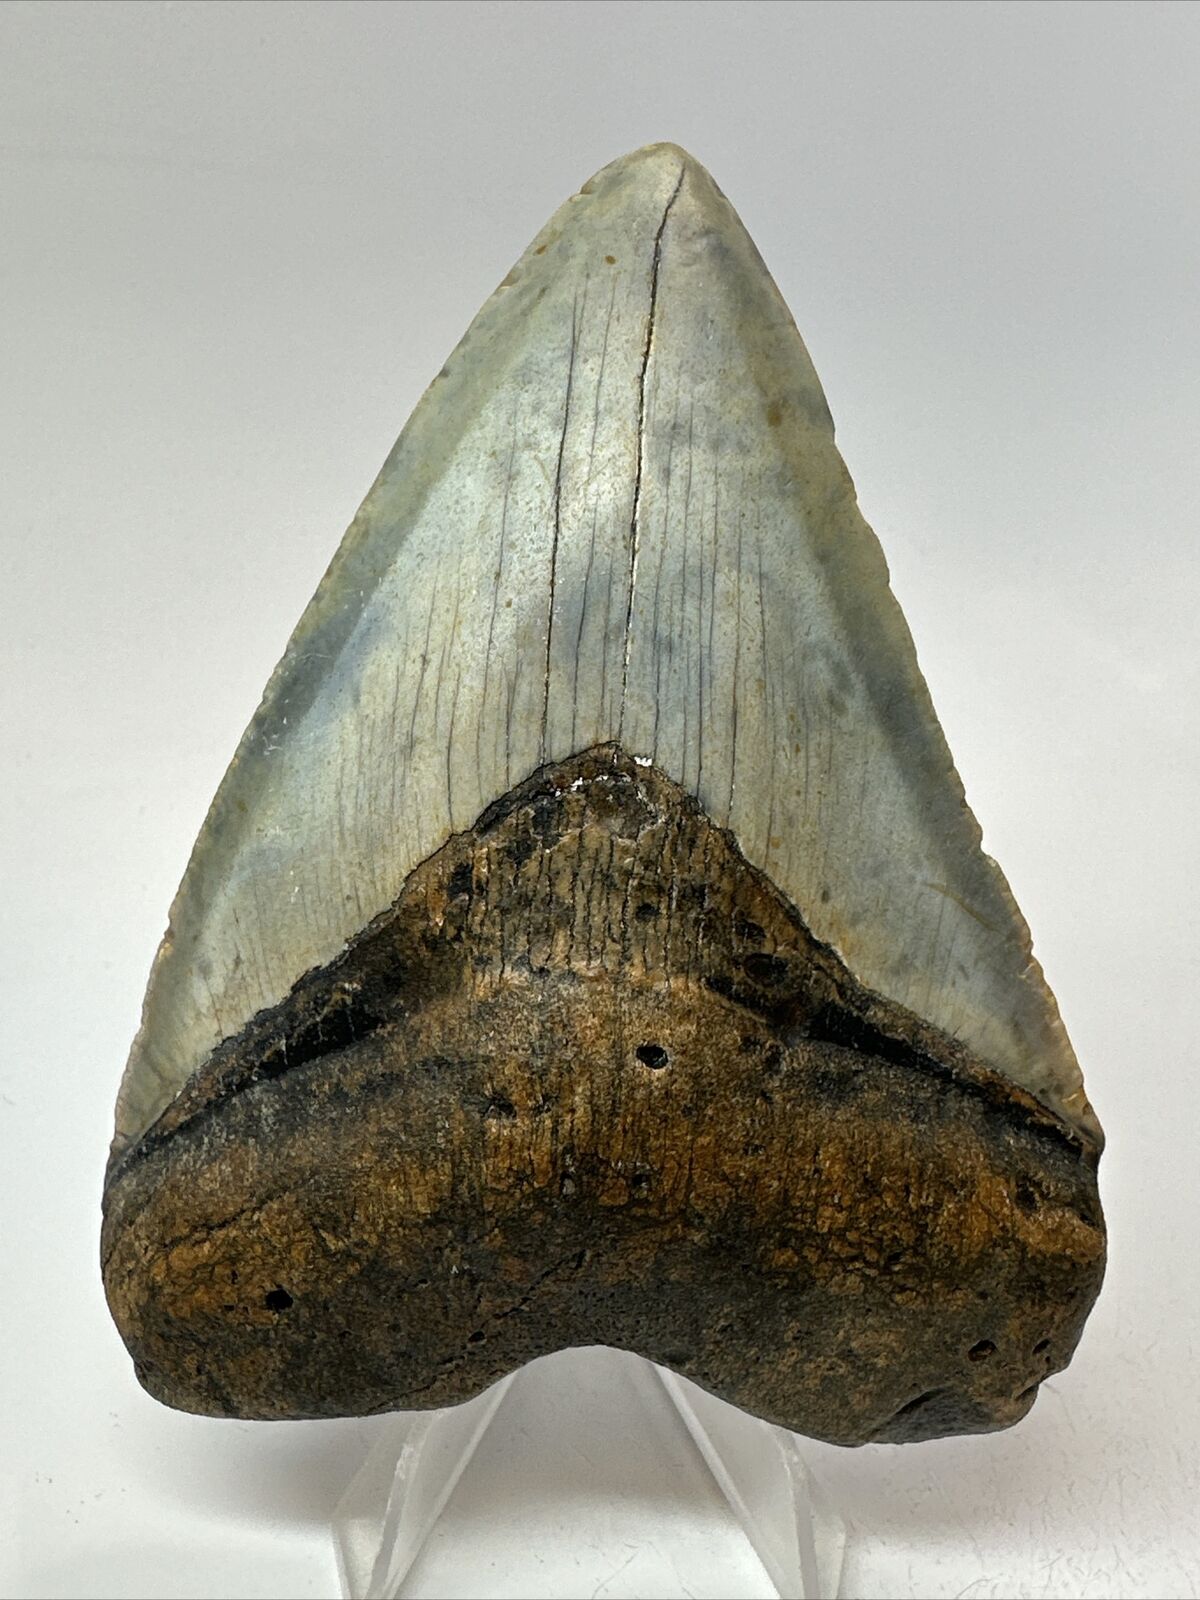 Megalodon Shark Tooth - Carolina - Natural Fossil - Authentic 18253